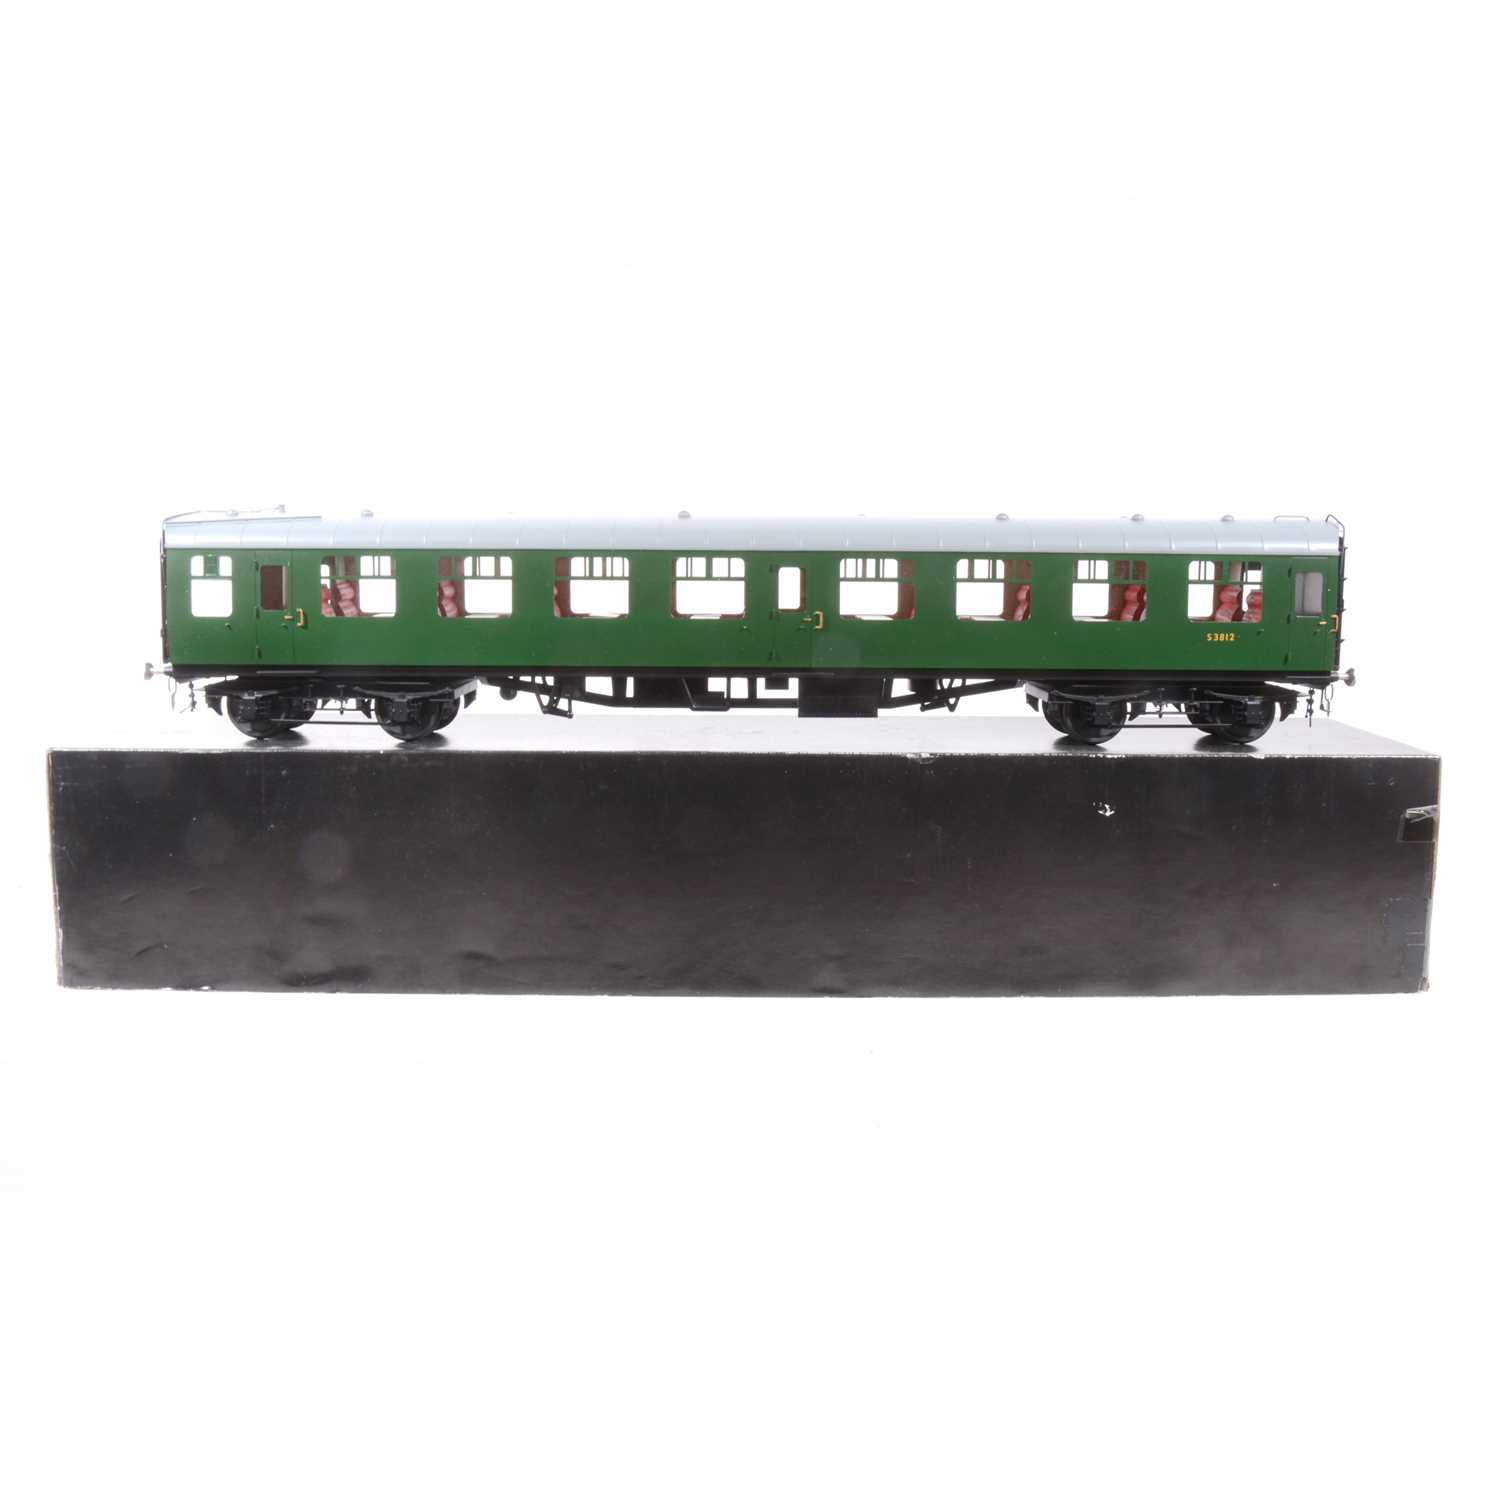 Lot 66 - Tower Brass Models, gauge 1 / G scale, 45mm passenger coach, BR green no.S3812, boxed.